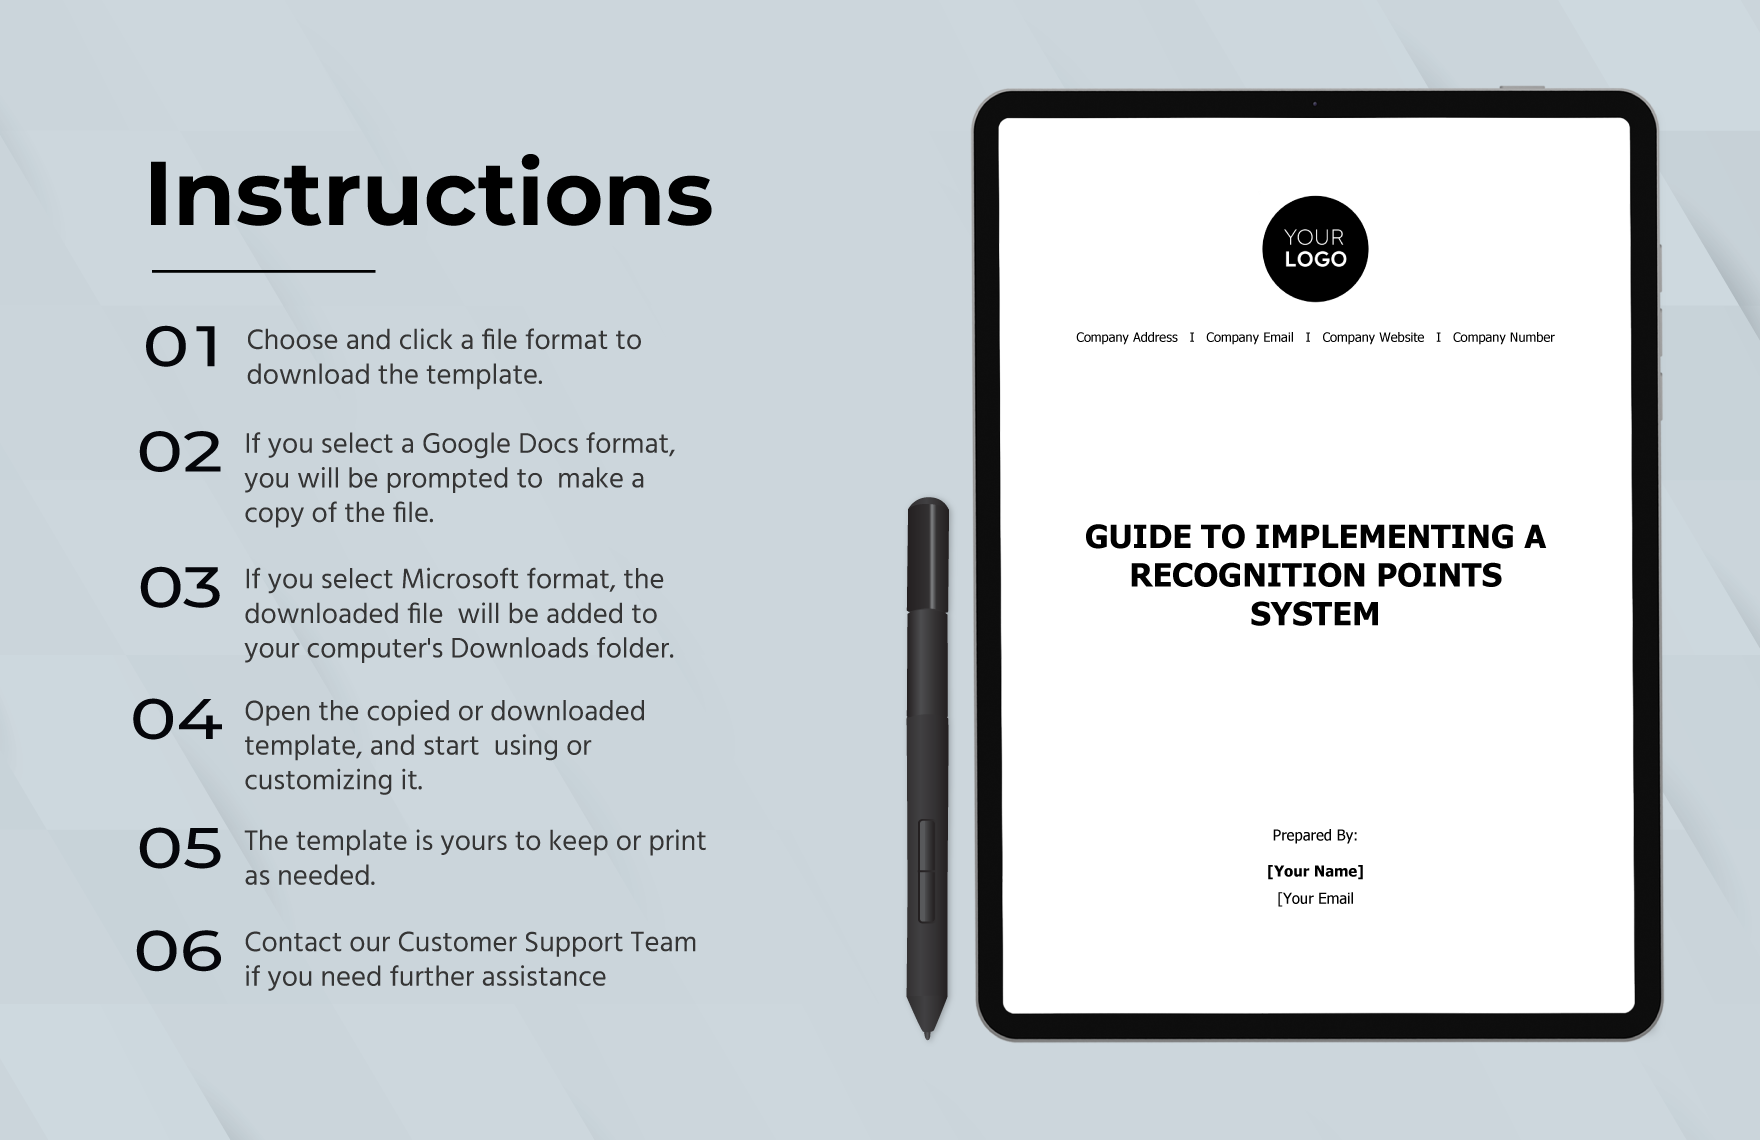 Guide to Implementing a Recognition Points System HR Template